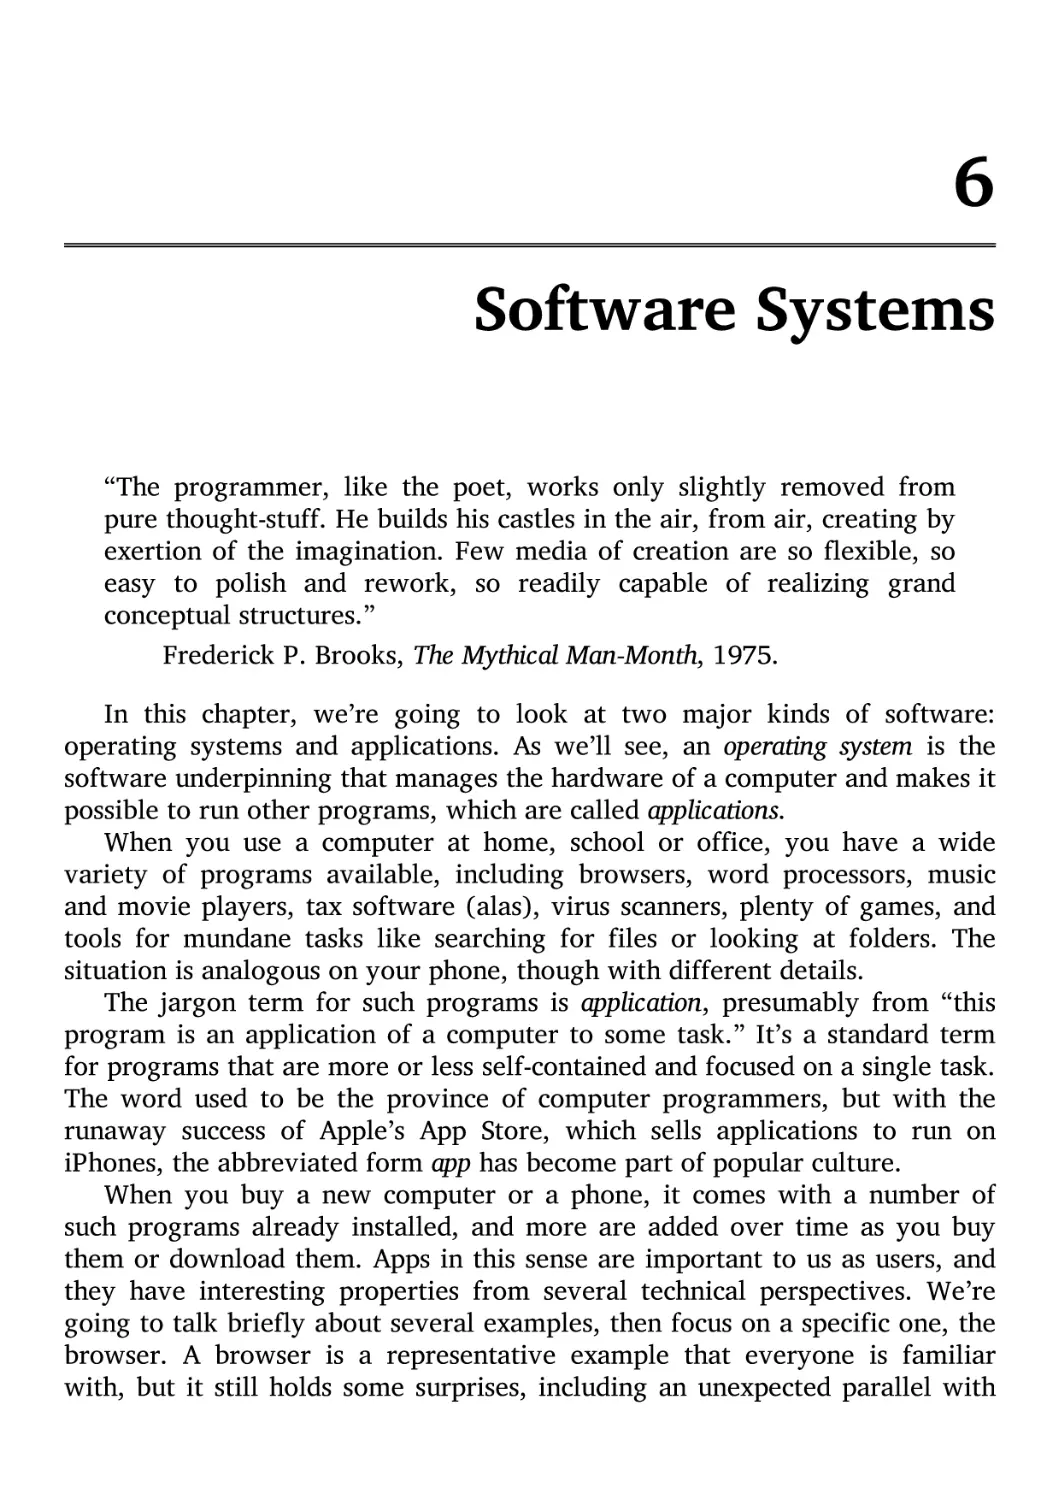 6. Software Systems